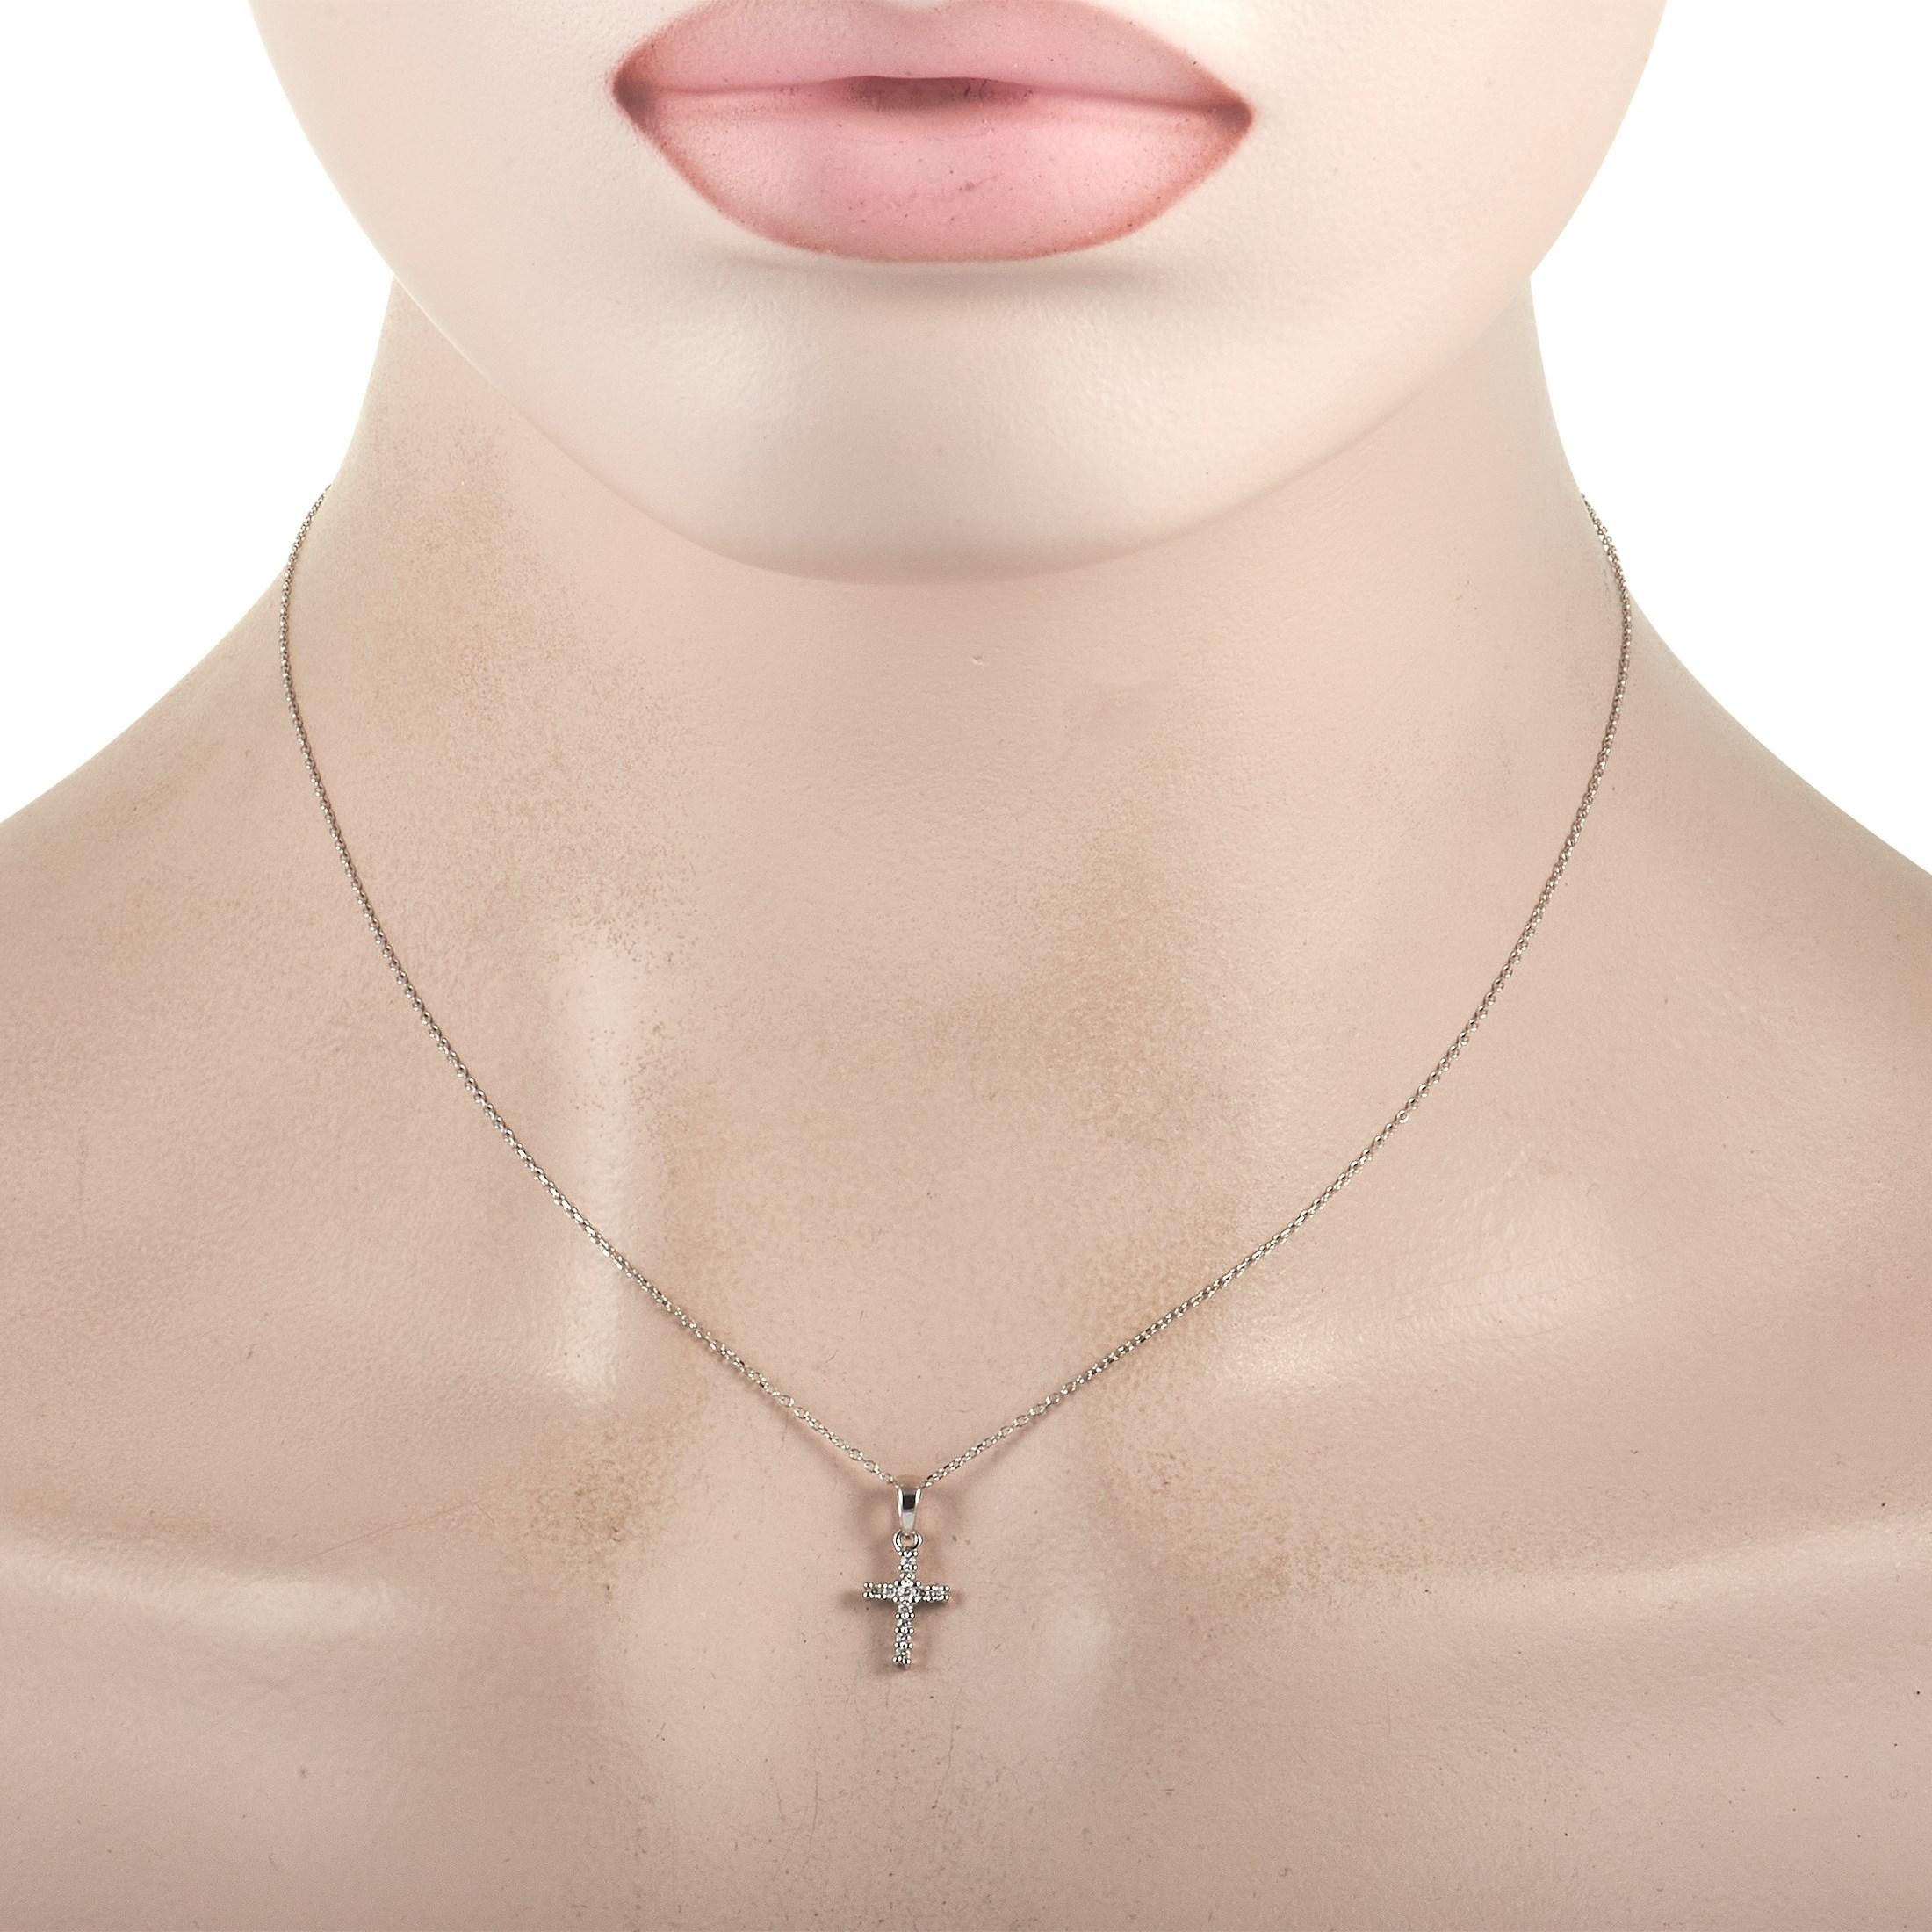 This dainty LB Exclusive 18K White Gold 0.10 ct Diamond Cross necklace will never go out of style! The necklace is made with a white gold chain, highlighting a stunning matching 18K white gold cross pendant. The cross pendant is set with two